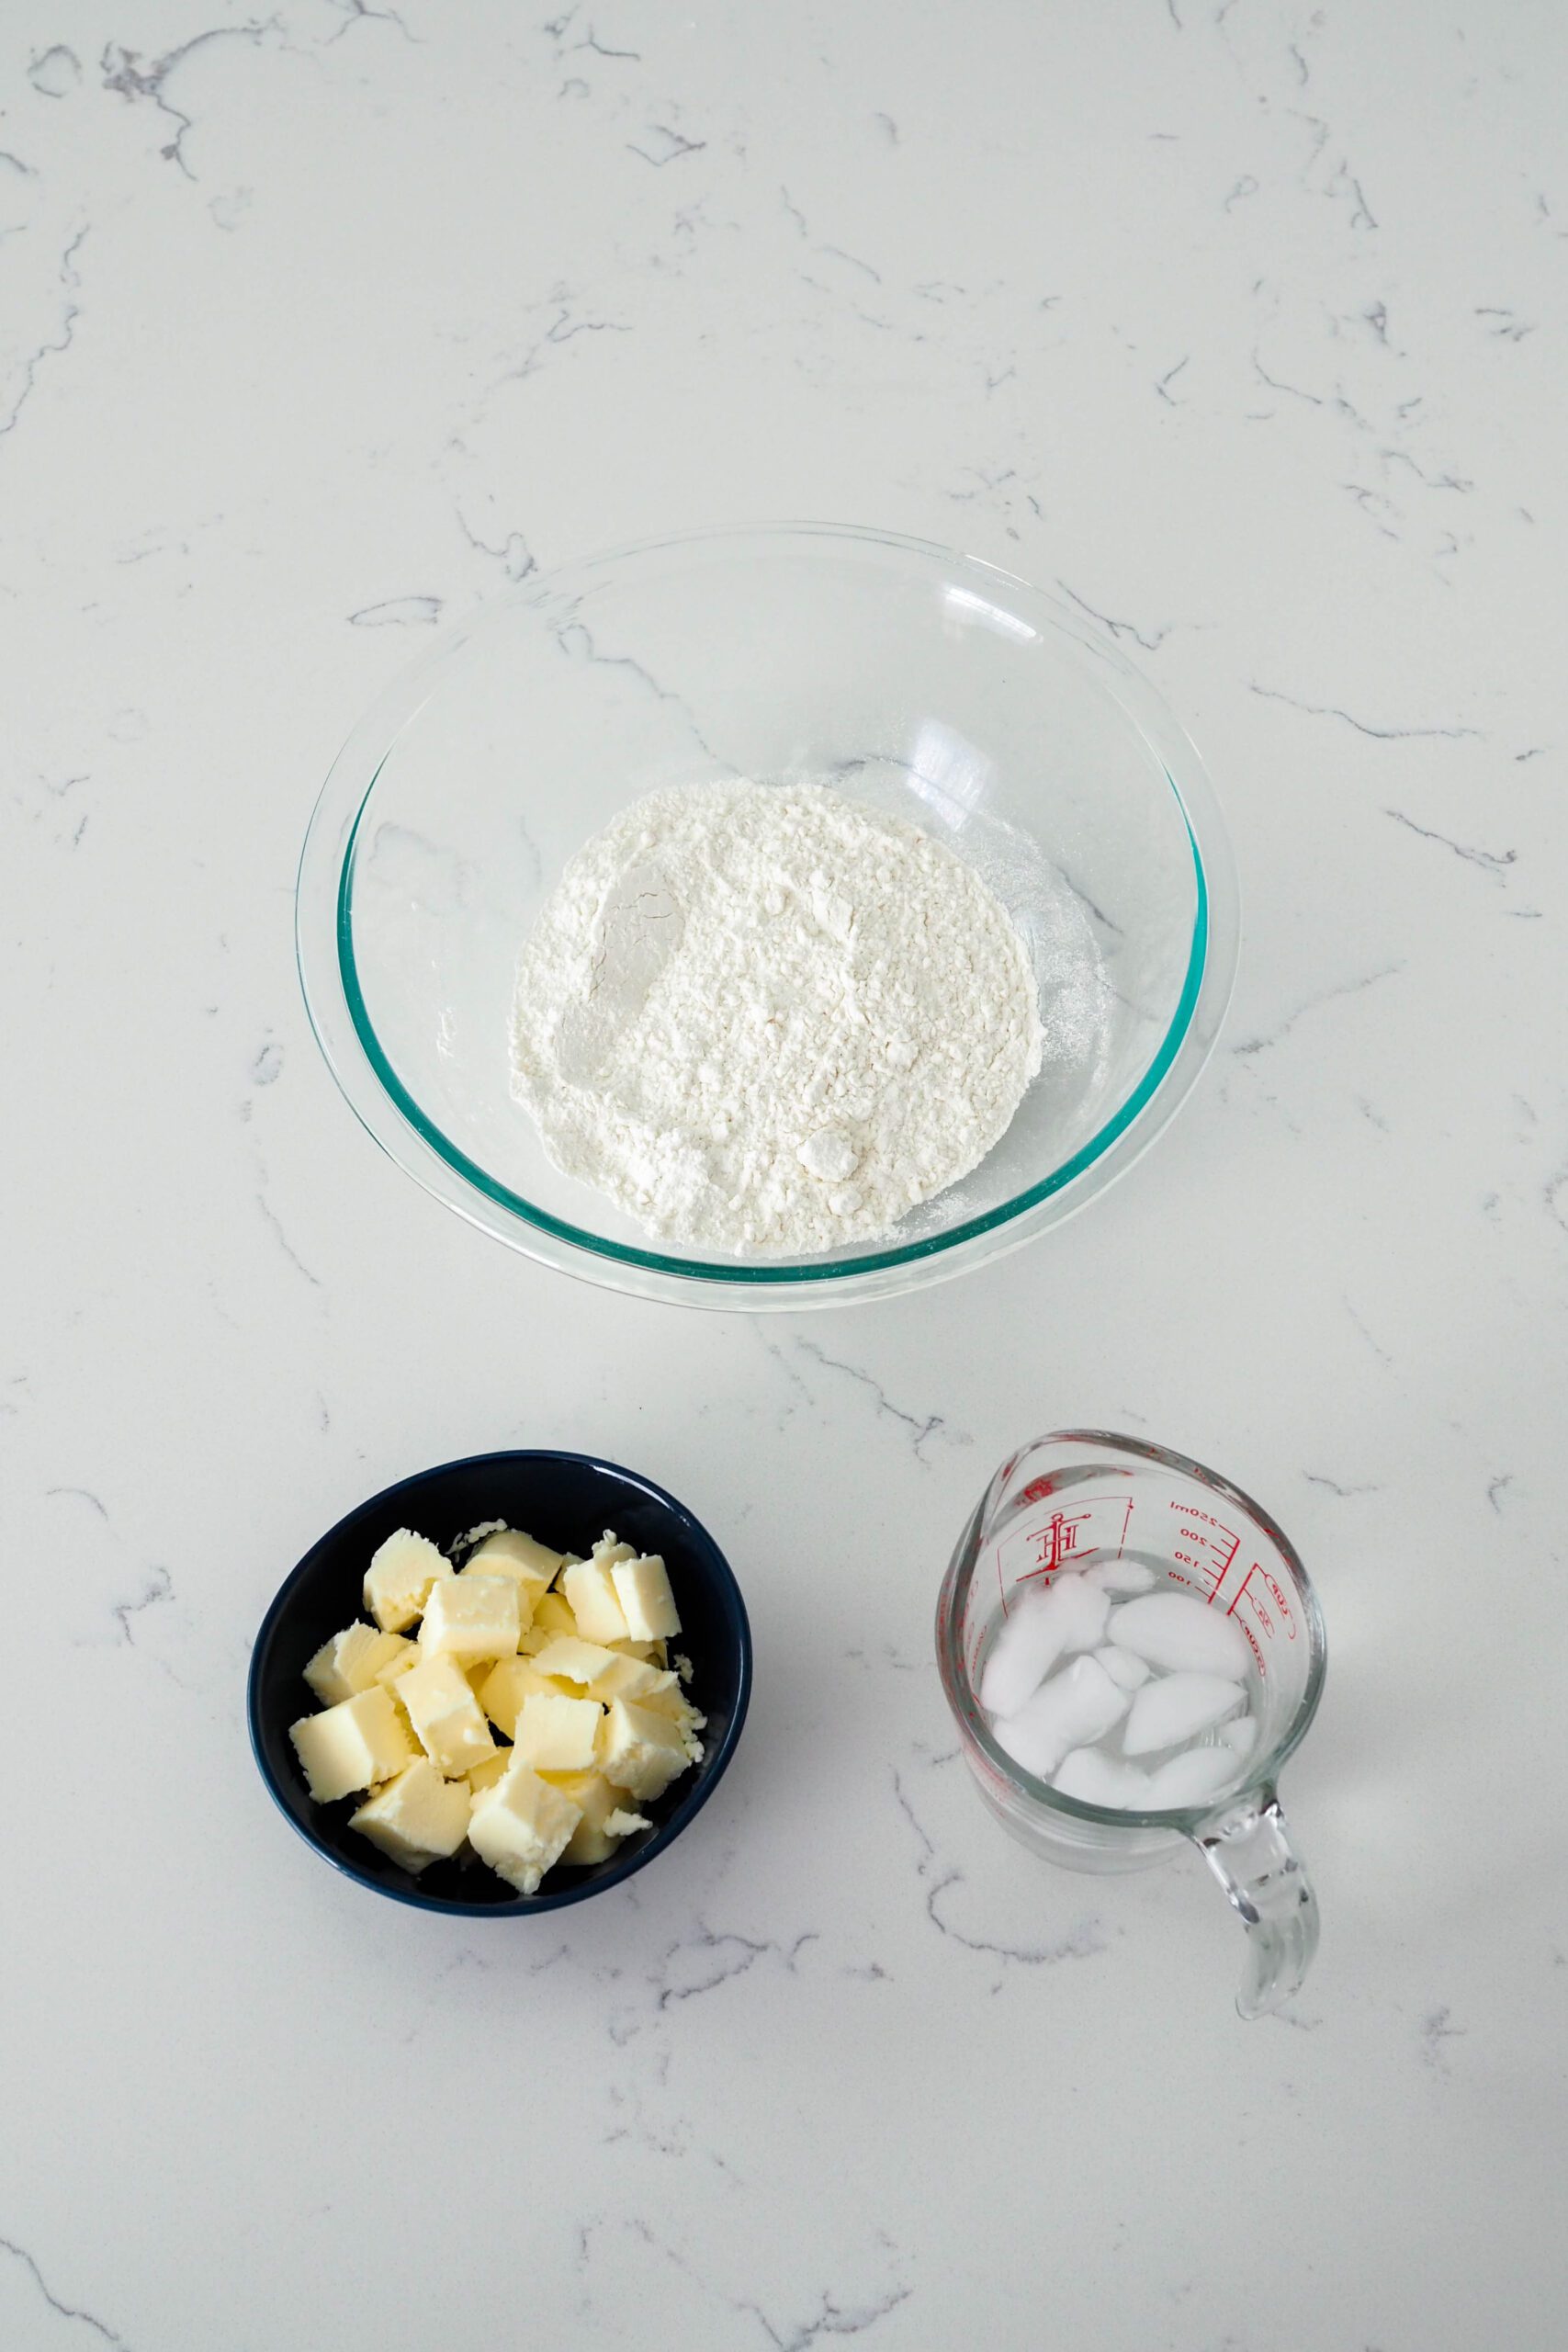 A big bowl of flour, a small bowl of butter, and a measuring cup with water are on a quartz counter.